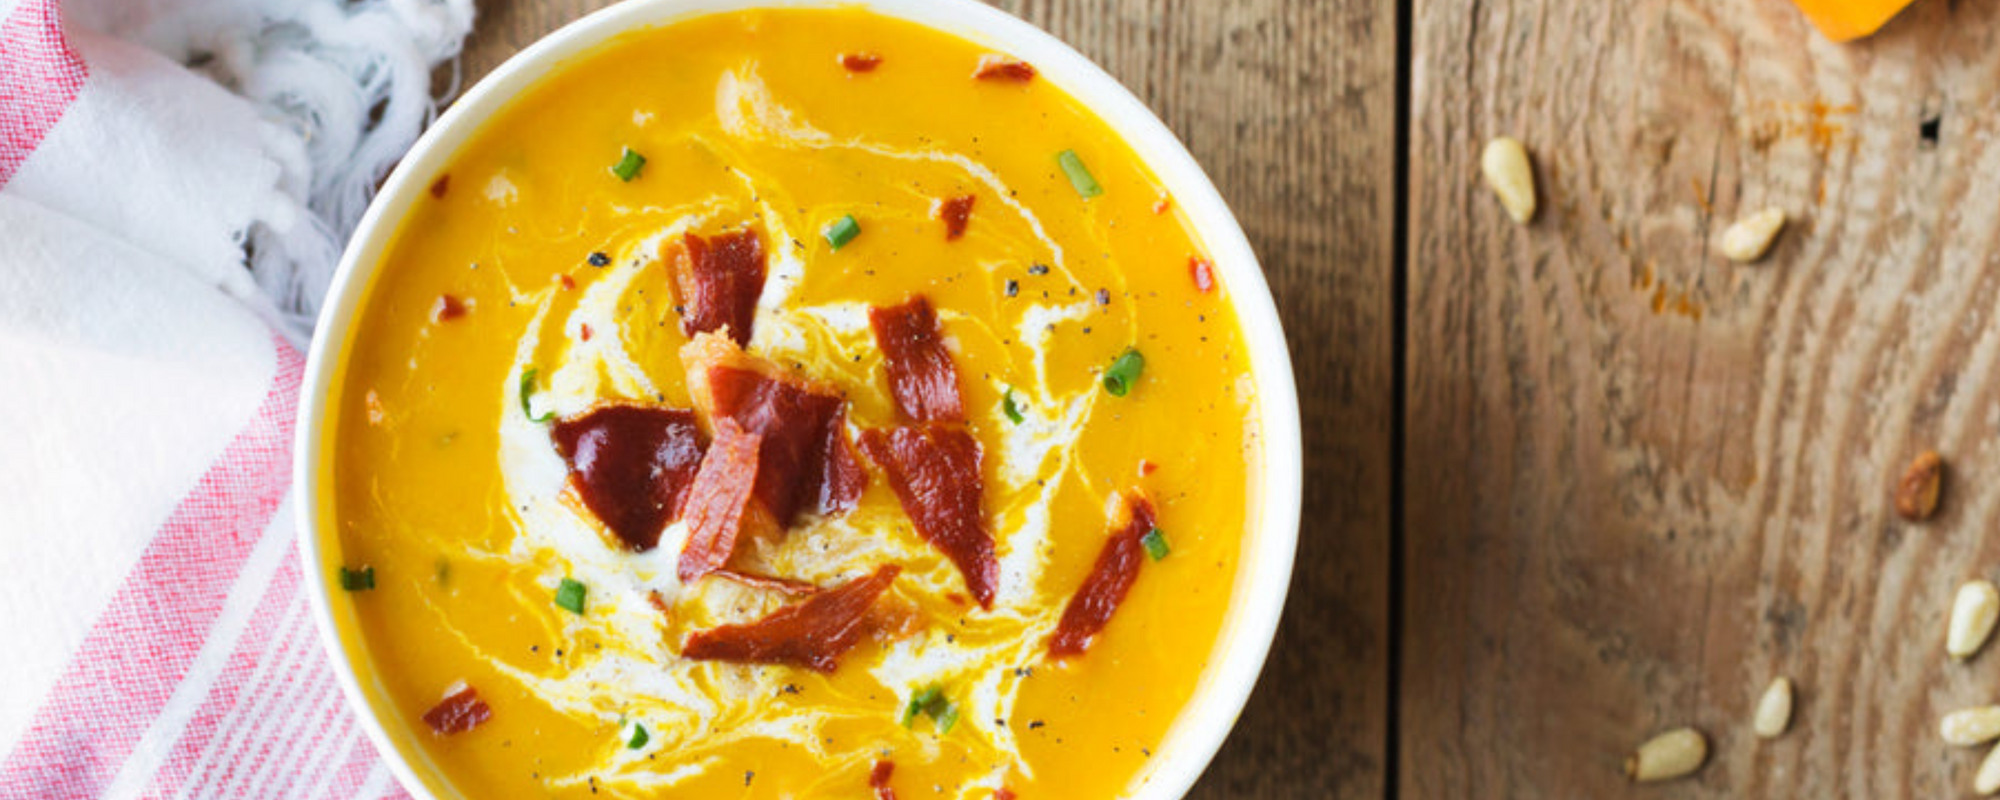 Roasted Root Vegetable Soup with a Winter Warmer Twist